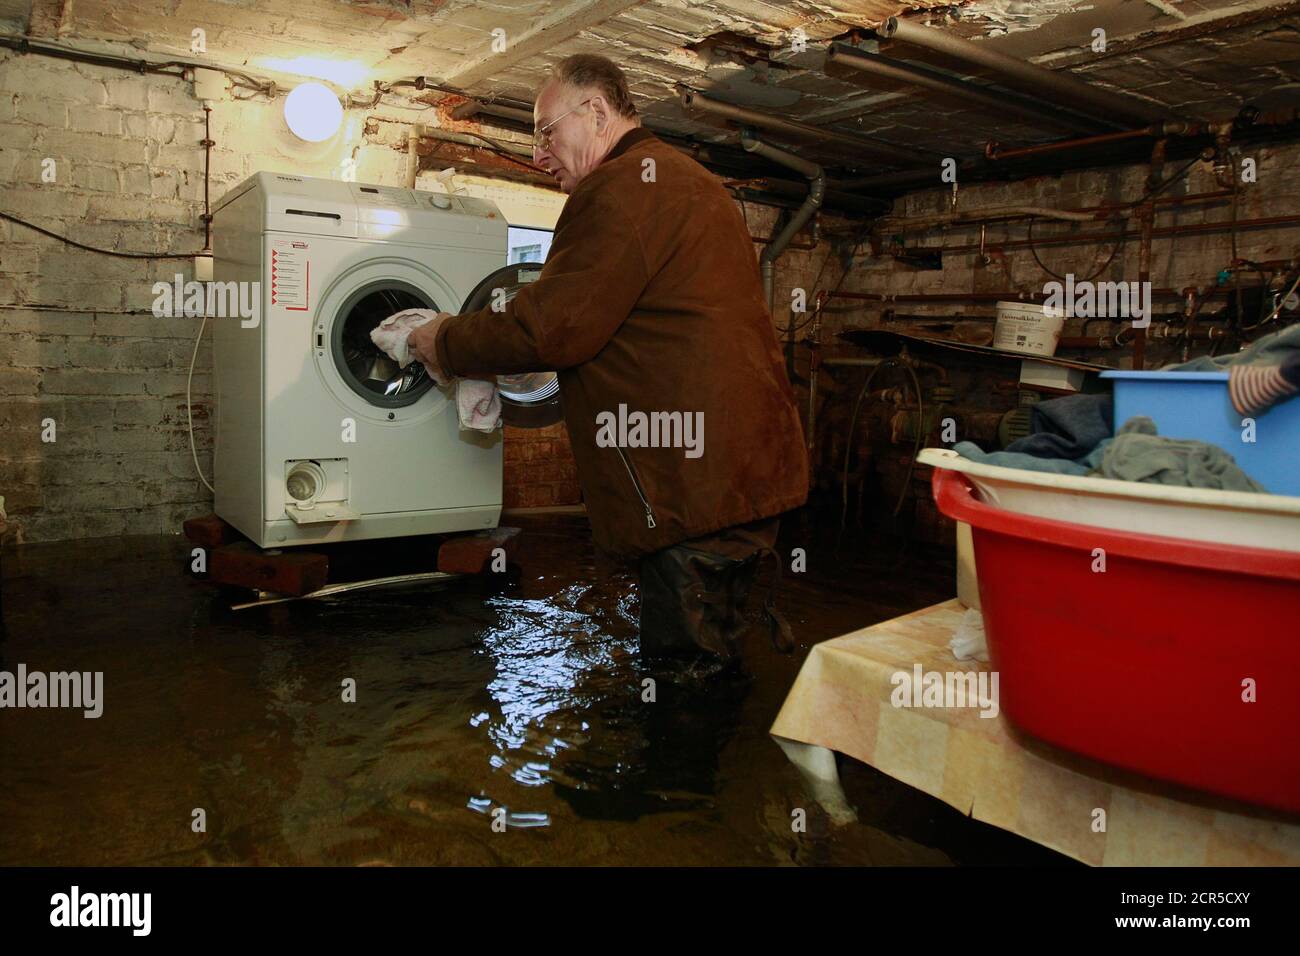 Hans-Adolf Fakler loads his washing machine in his flooded basement after  ground water broke in, at the village of Golzow near the Polish border,  January 18, 201. Many field and basements in